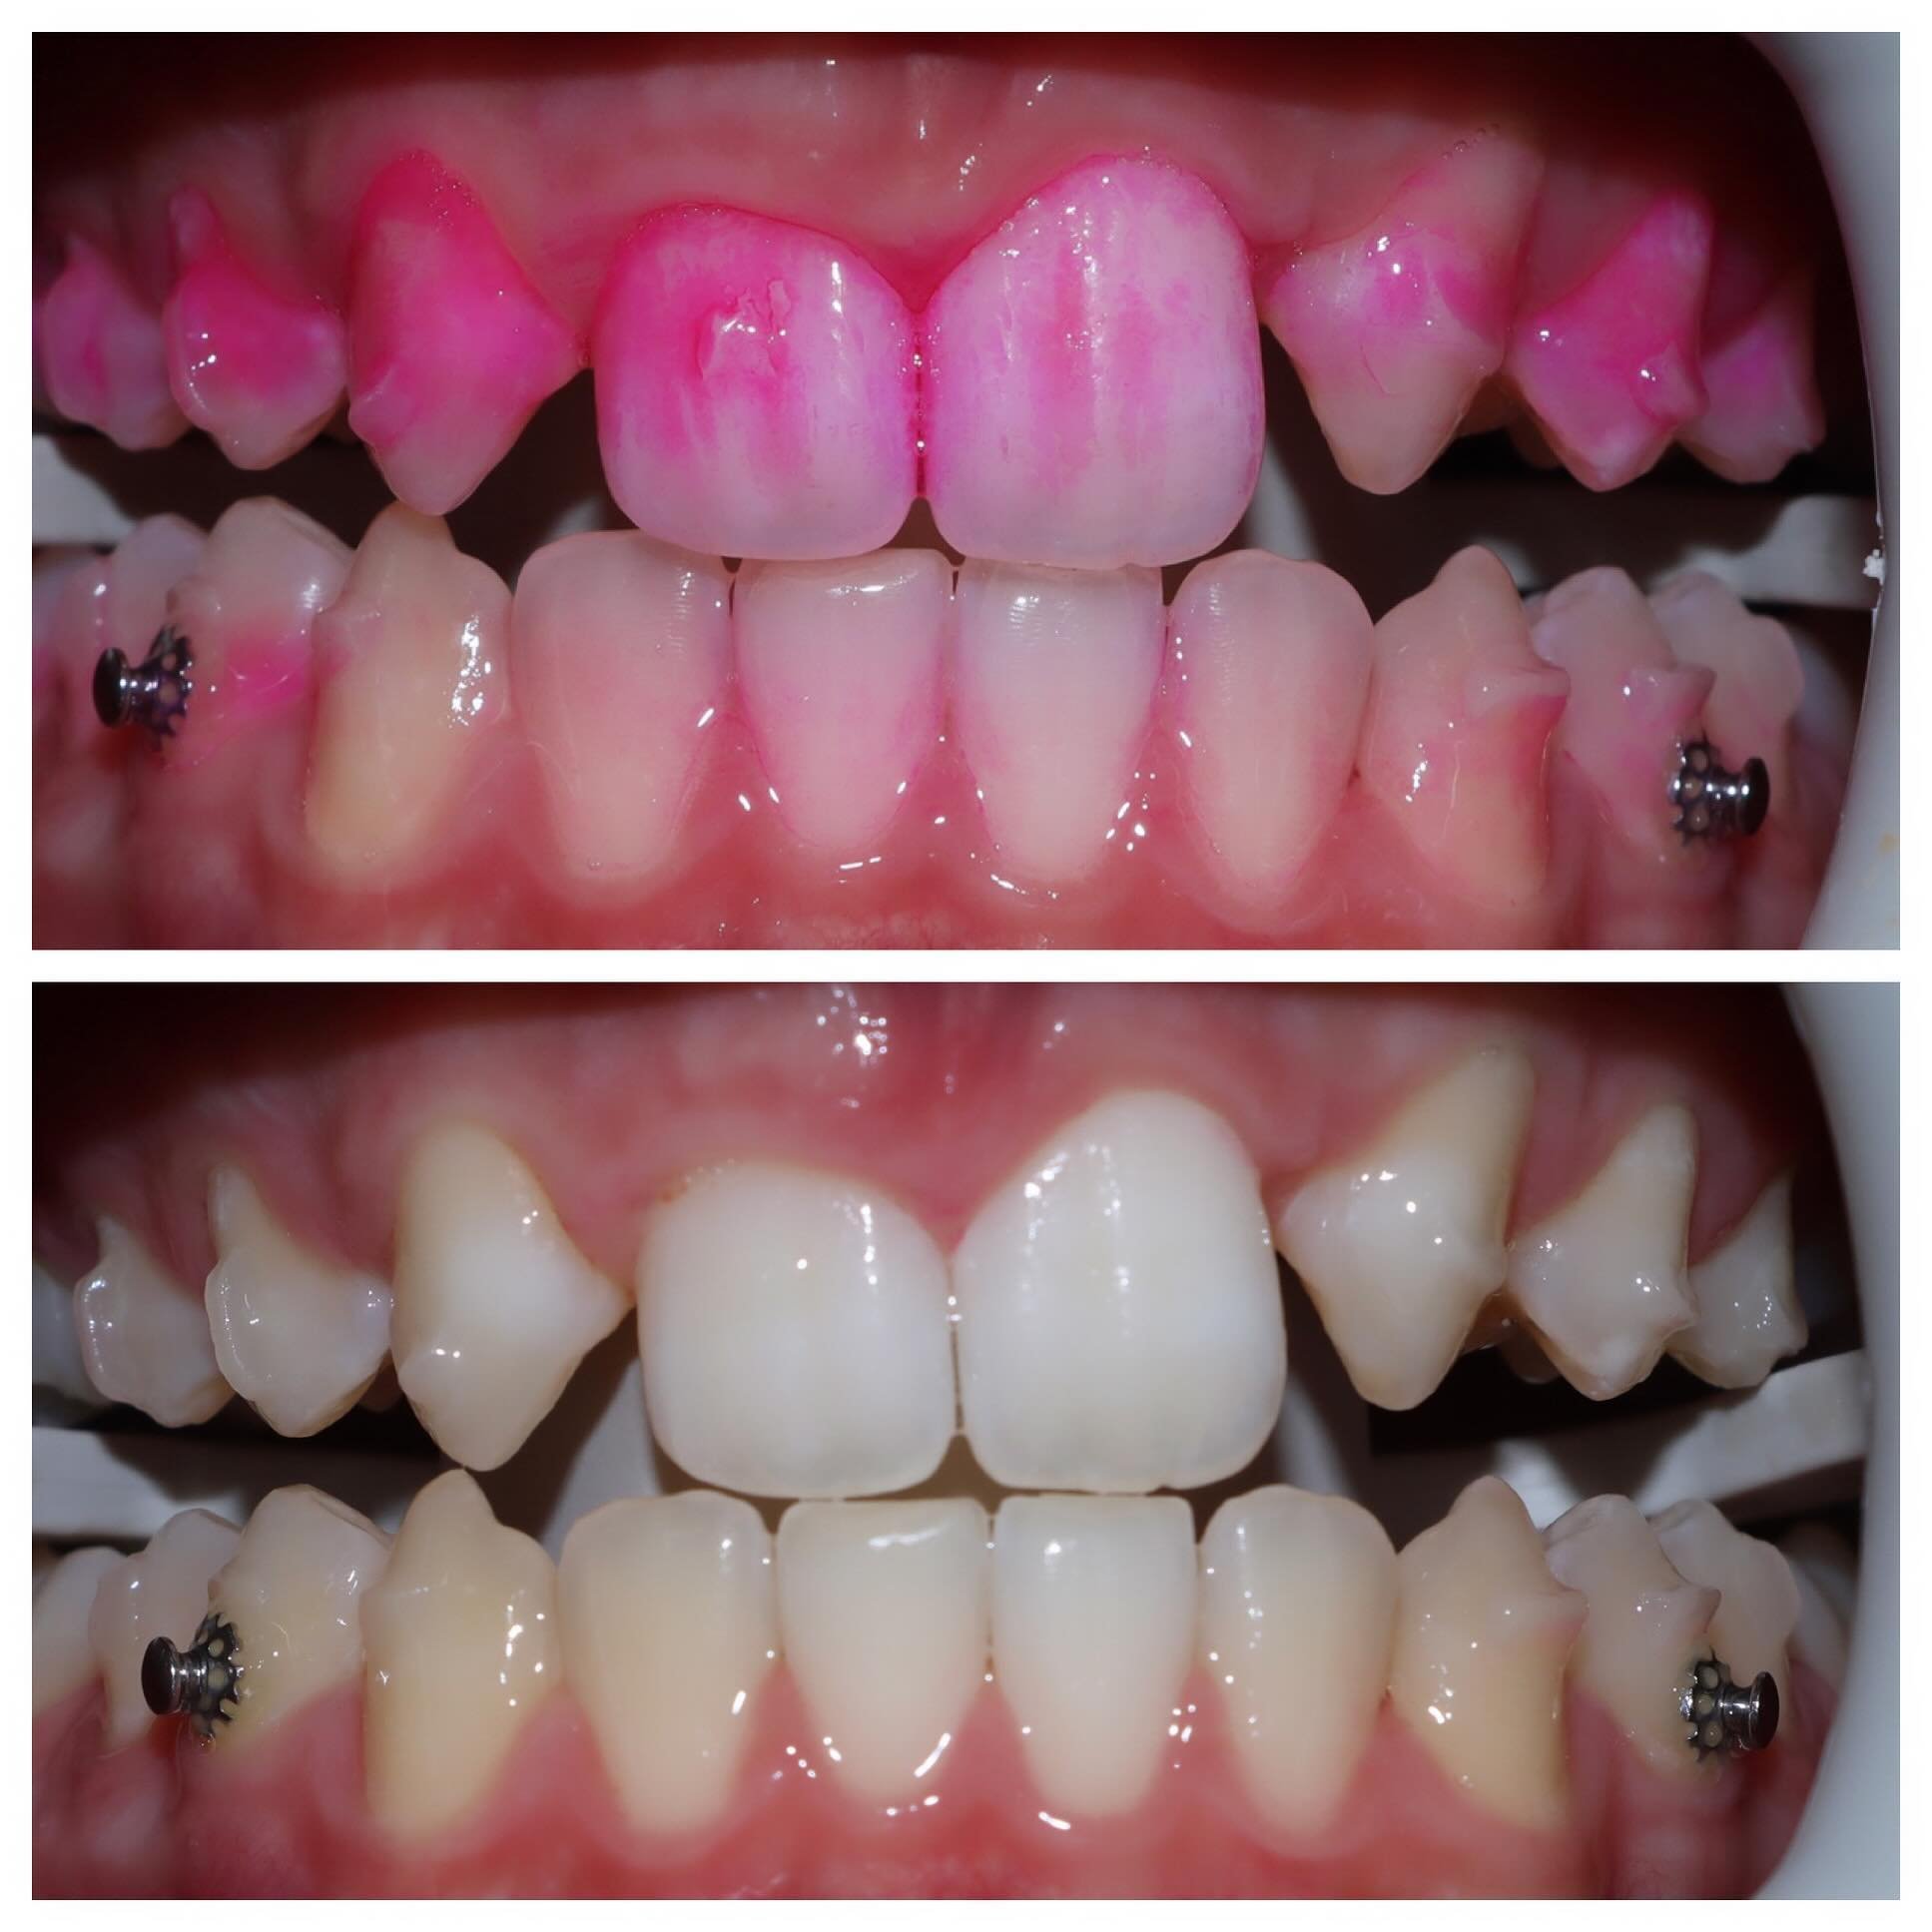 Disclosing solution is a great patient education tool that highlights the plaque/tartar on the teeth. The pink solution dyes the dental biofilm and gives a clear visualization of the present buildup. 

Here is our patient before and after their clean